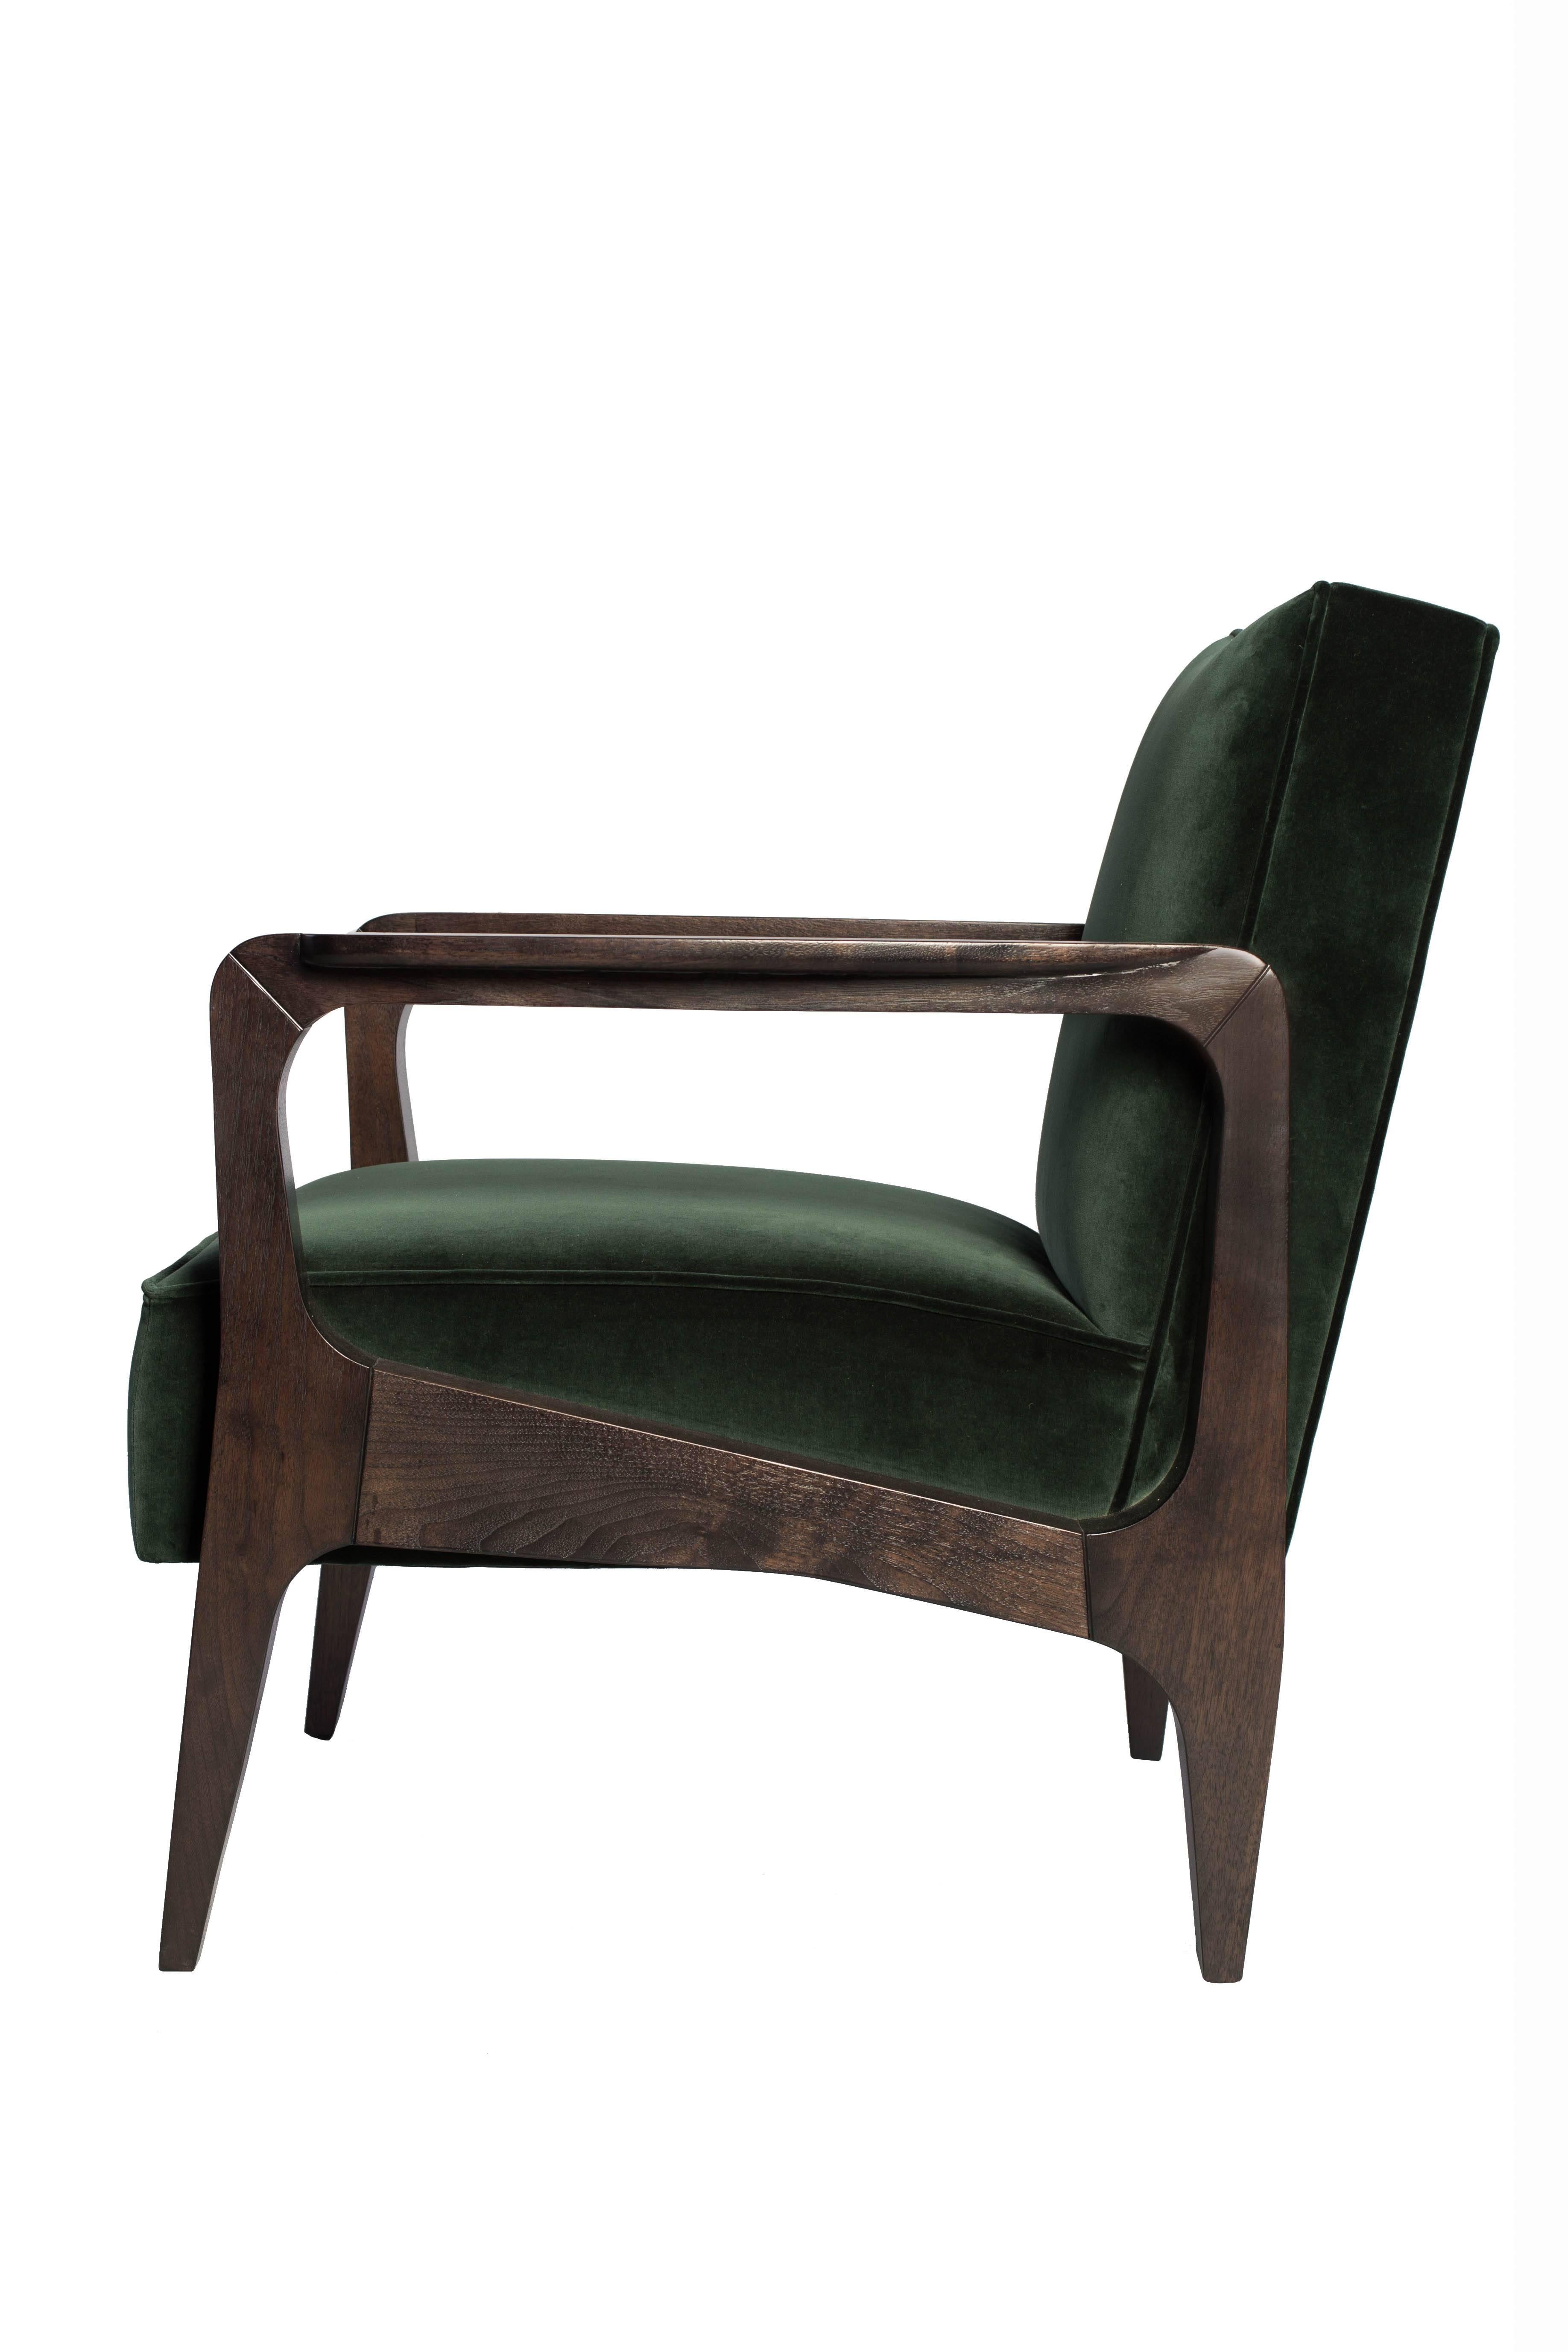 British Atena Armchair in Black American Walnut Stained in Black Ebony and Luxe Velvet For Sale